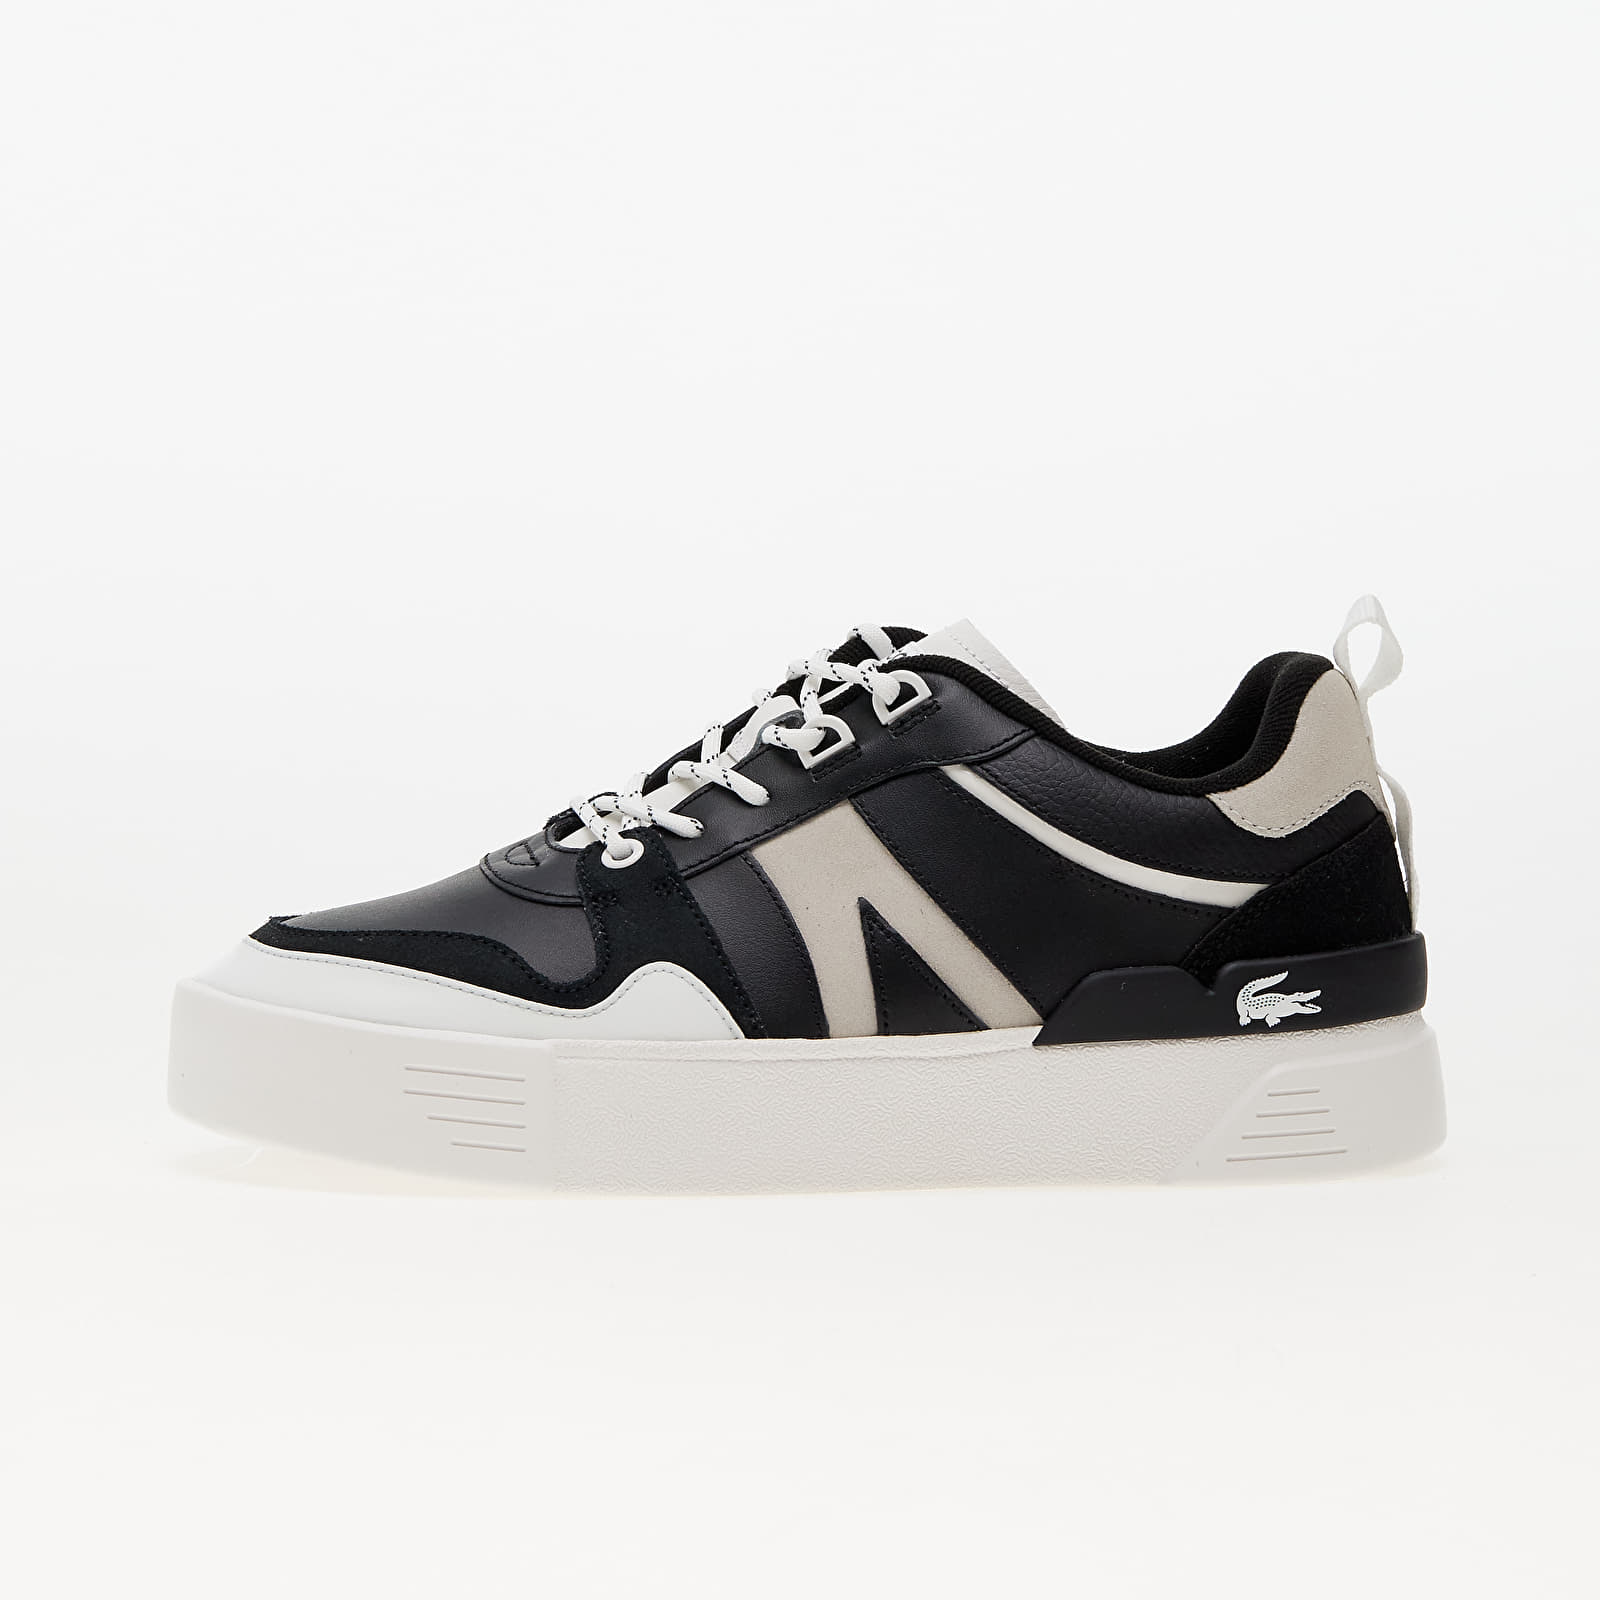 Women's sneakers and shoes LACOSTE L002 Black/ White